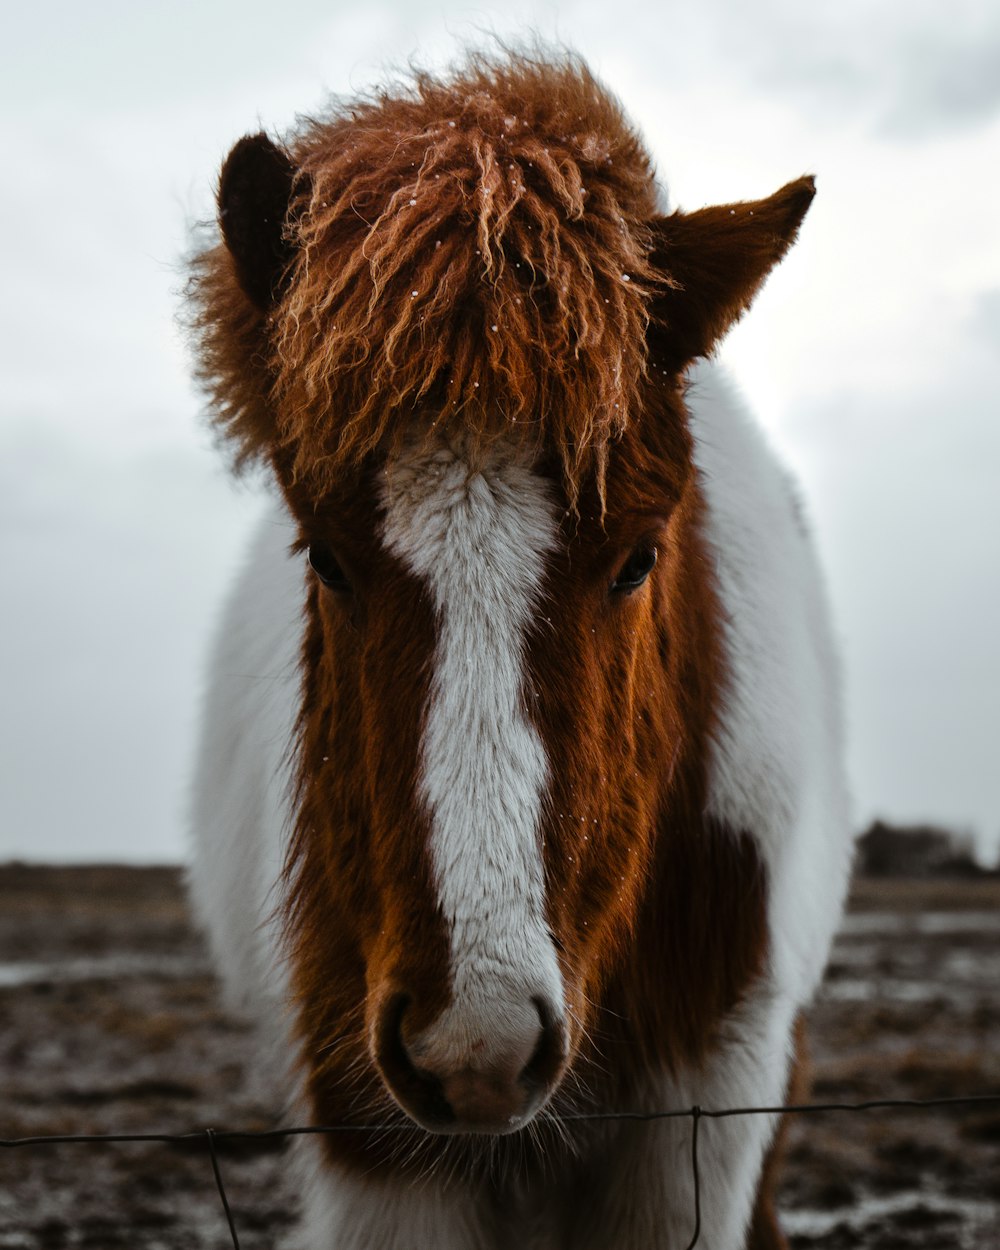 a brown and white horse standing next to a wire fence